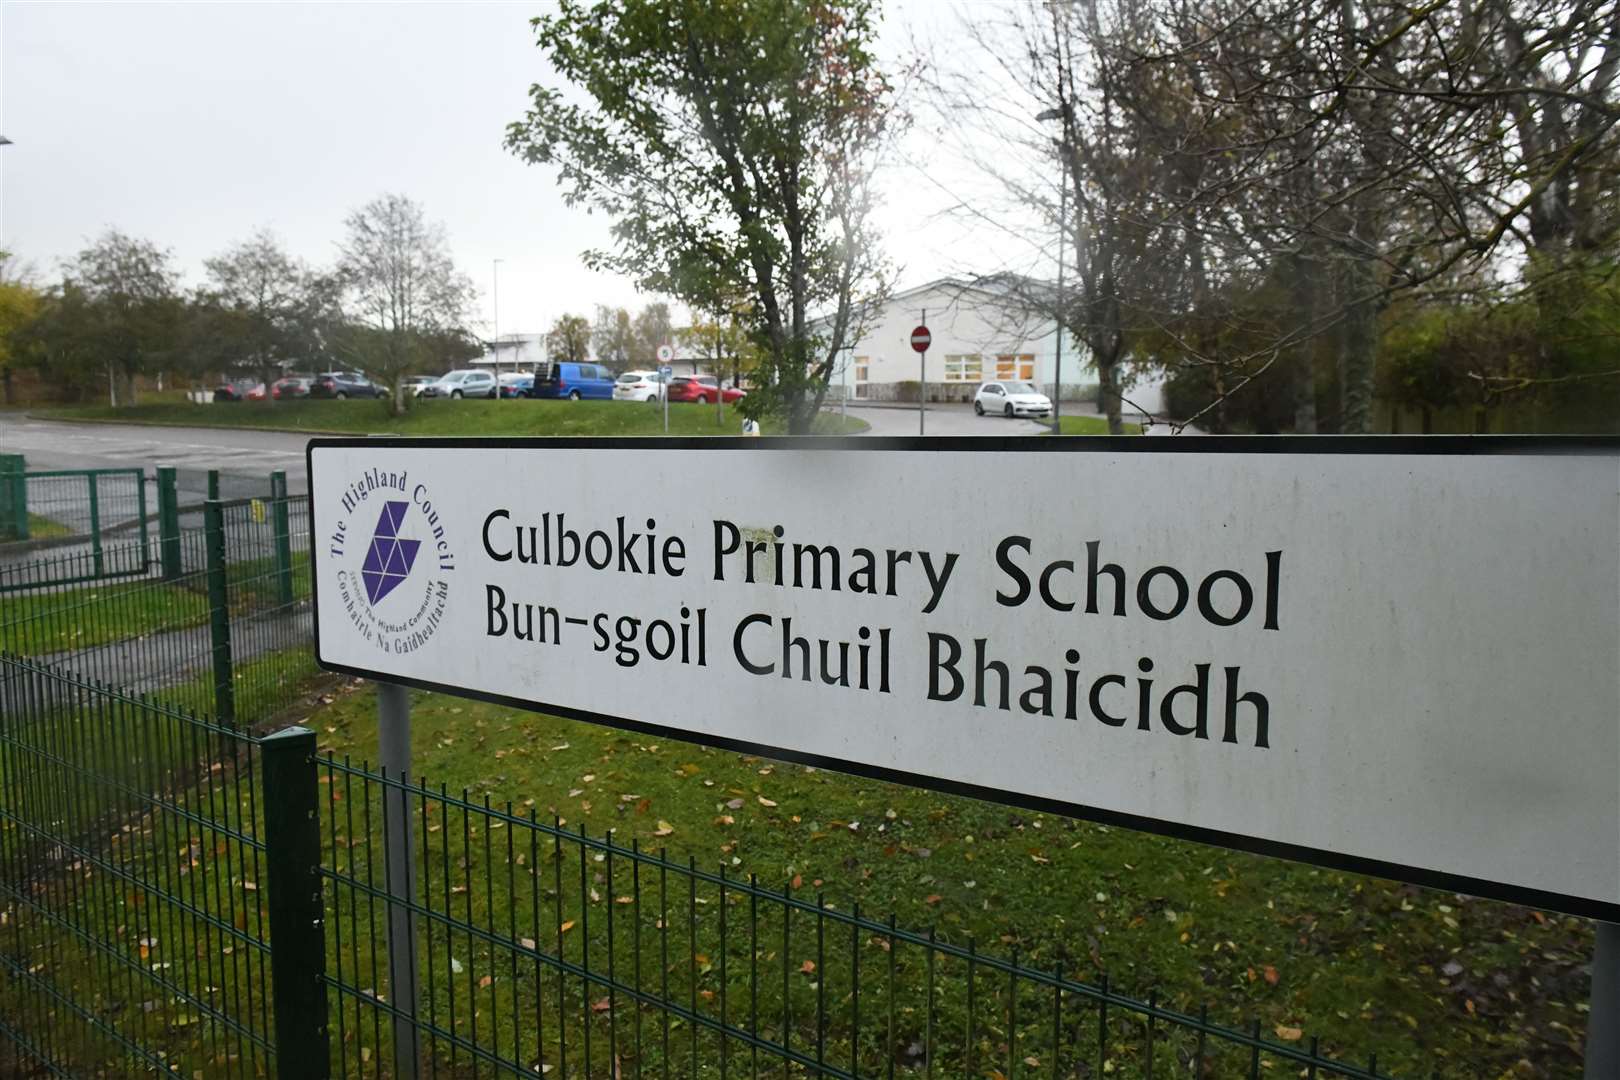 Culbokie Primary School Nursery is again in the spotlight 18 months after a similarly scathing report by inspectors. Picture: James Mackenzie.